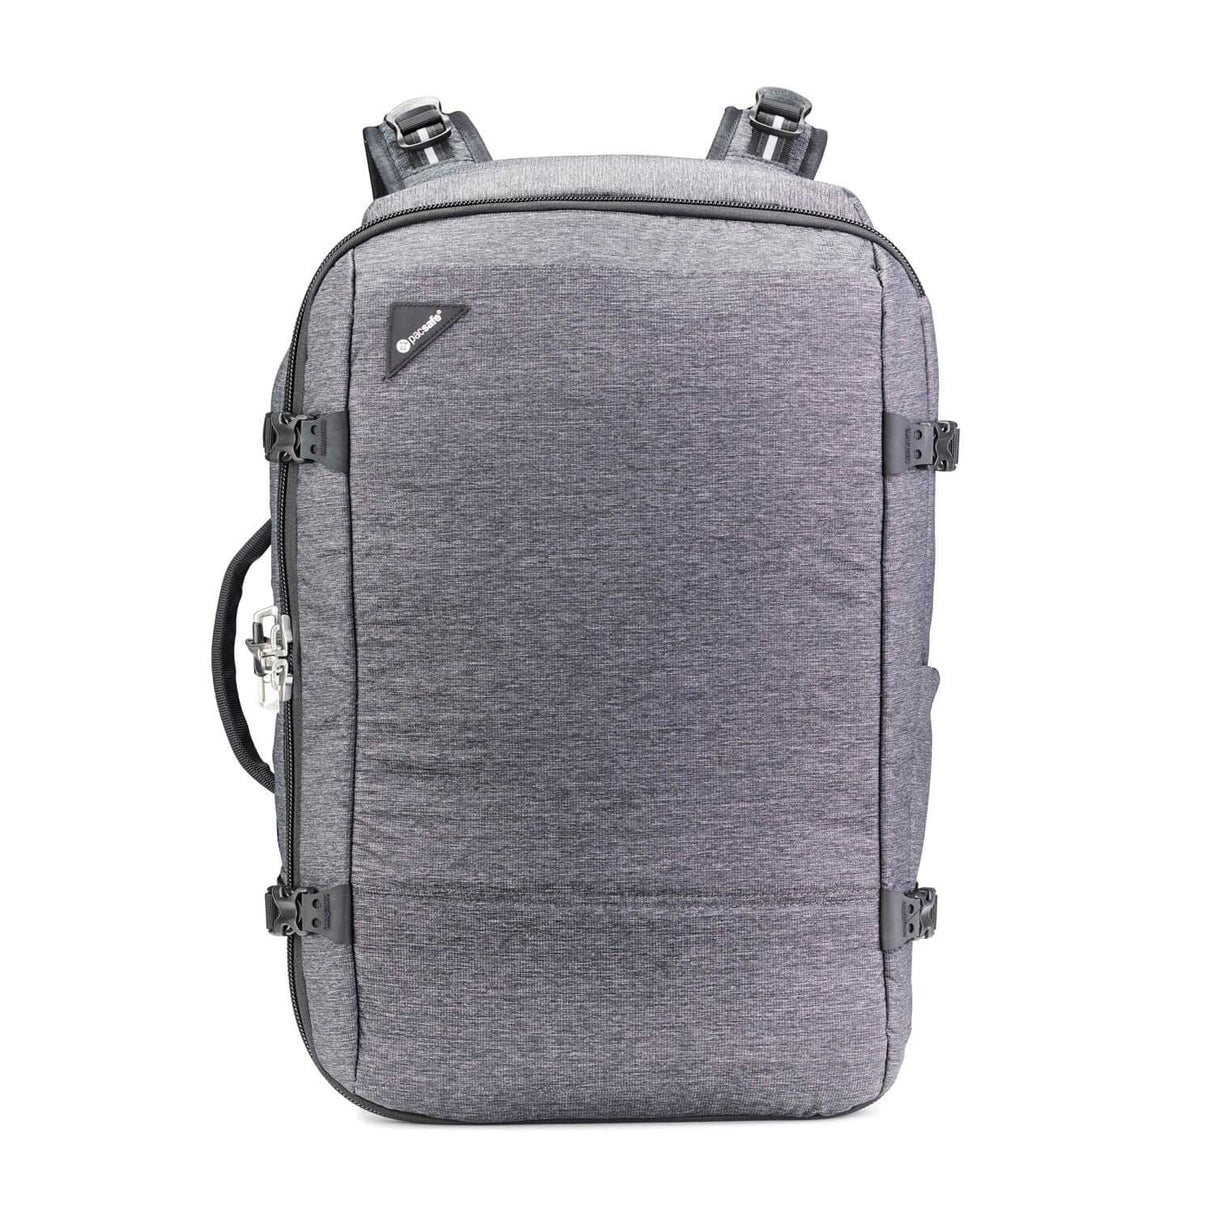 Pacsafe Vibe 40 anti-theft backpack